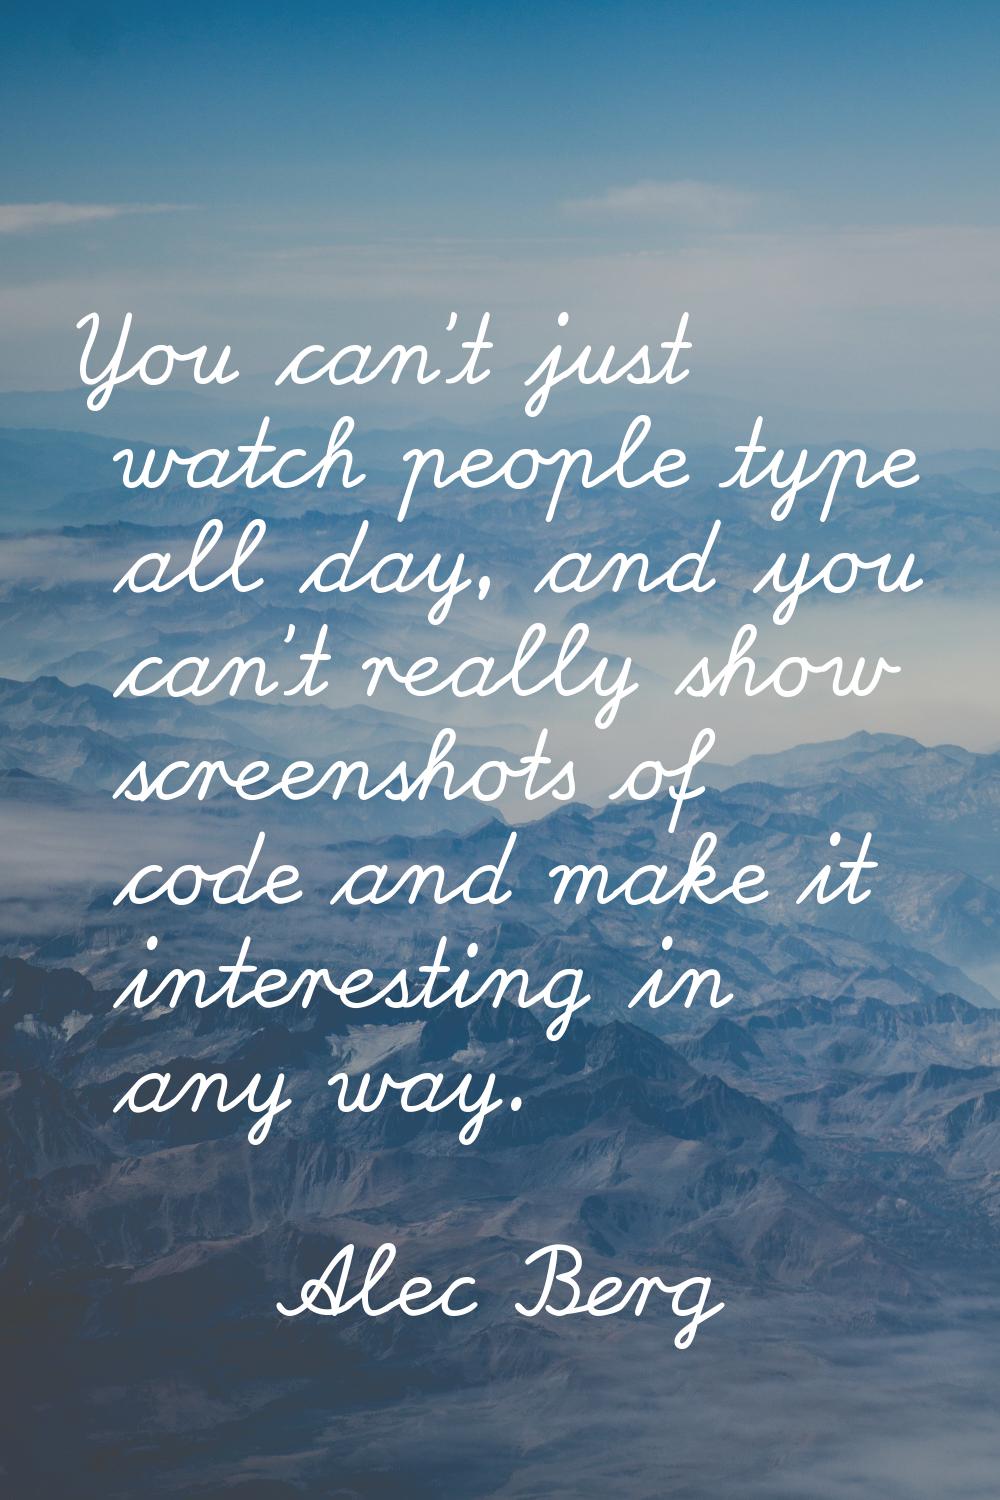 You can't just watch people type all day, and you can't really show screenshots of code and make it